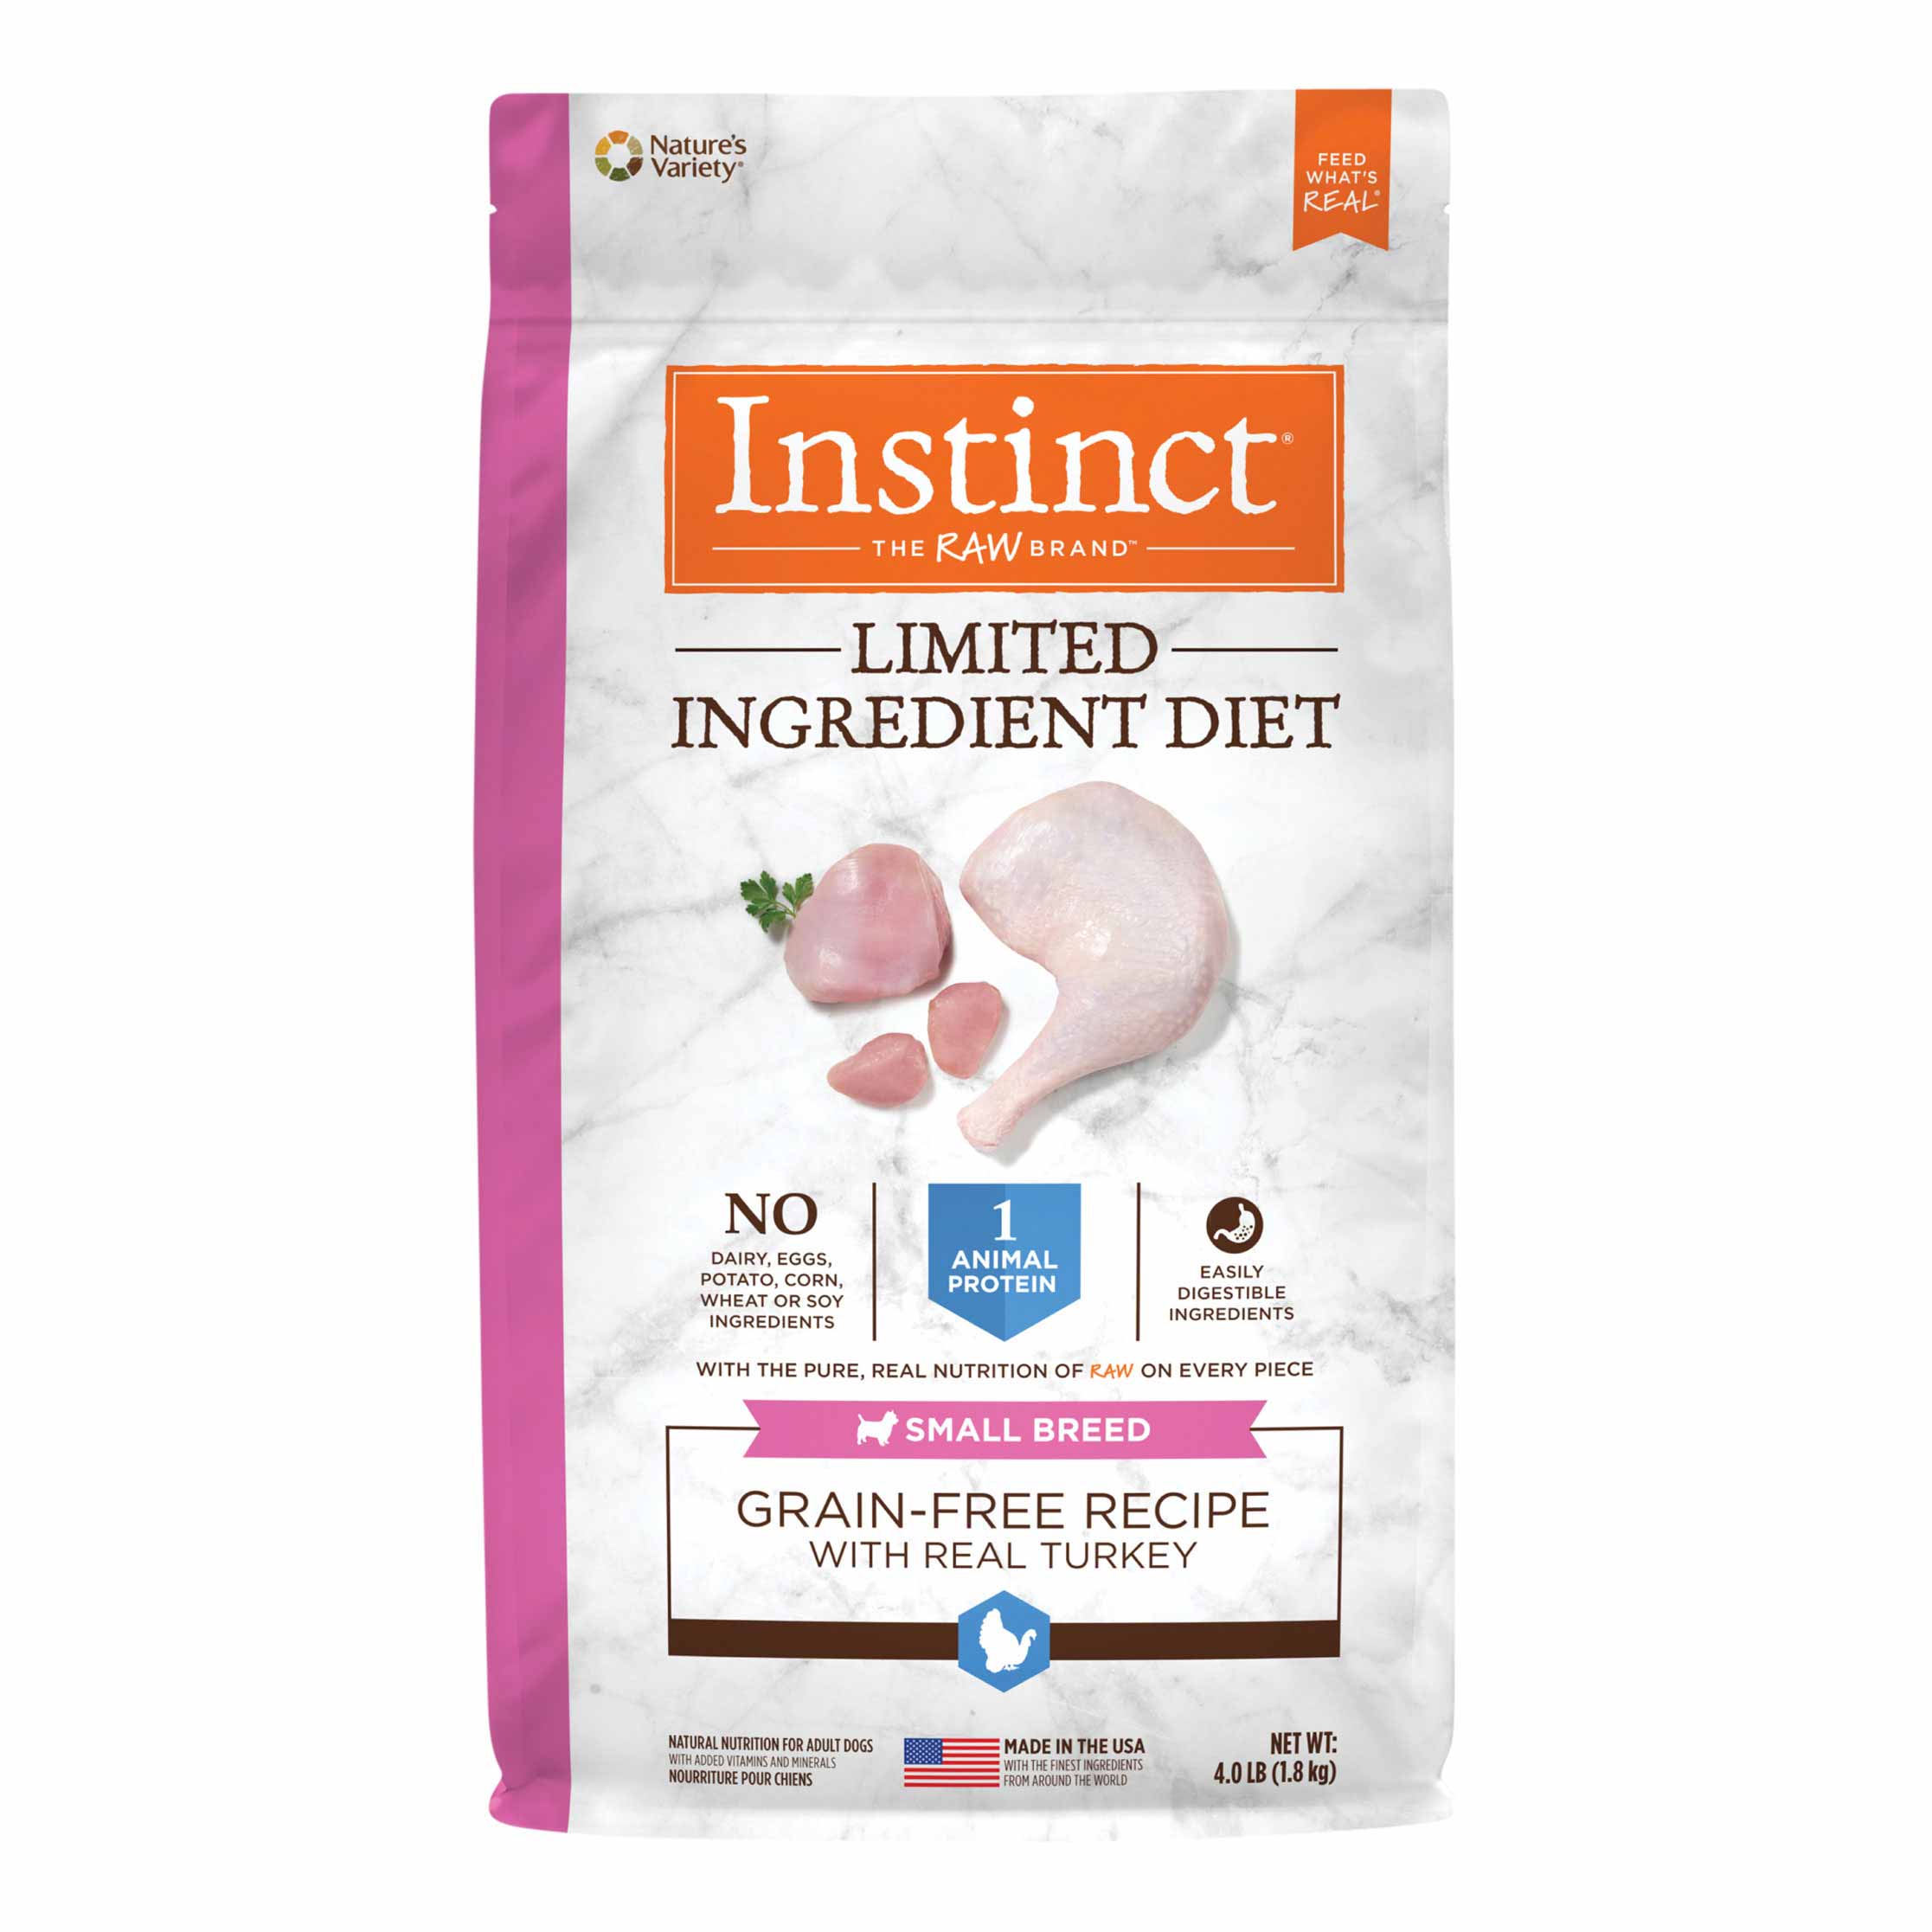 Instinct Limited Ingredient Diet Small Breed Grain-Free Turkey Recipe Freeze-Dried Raw Coated Dry Dog Food, 4 Pound Bag